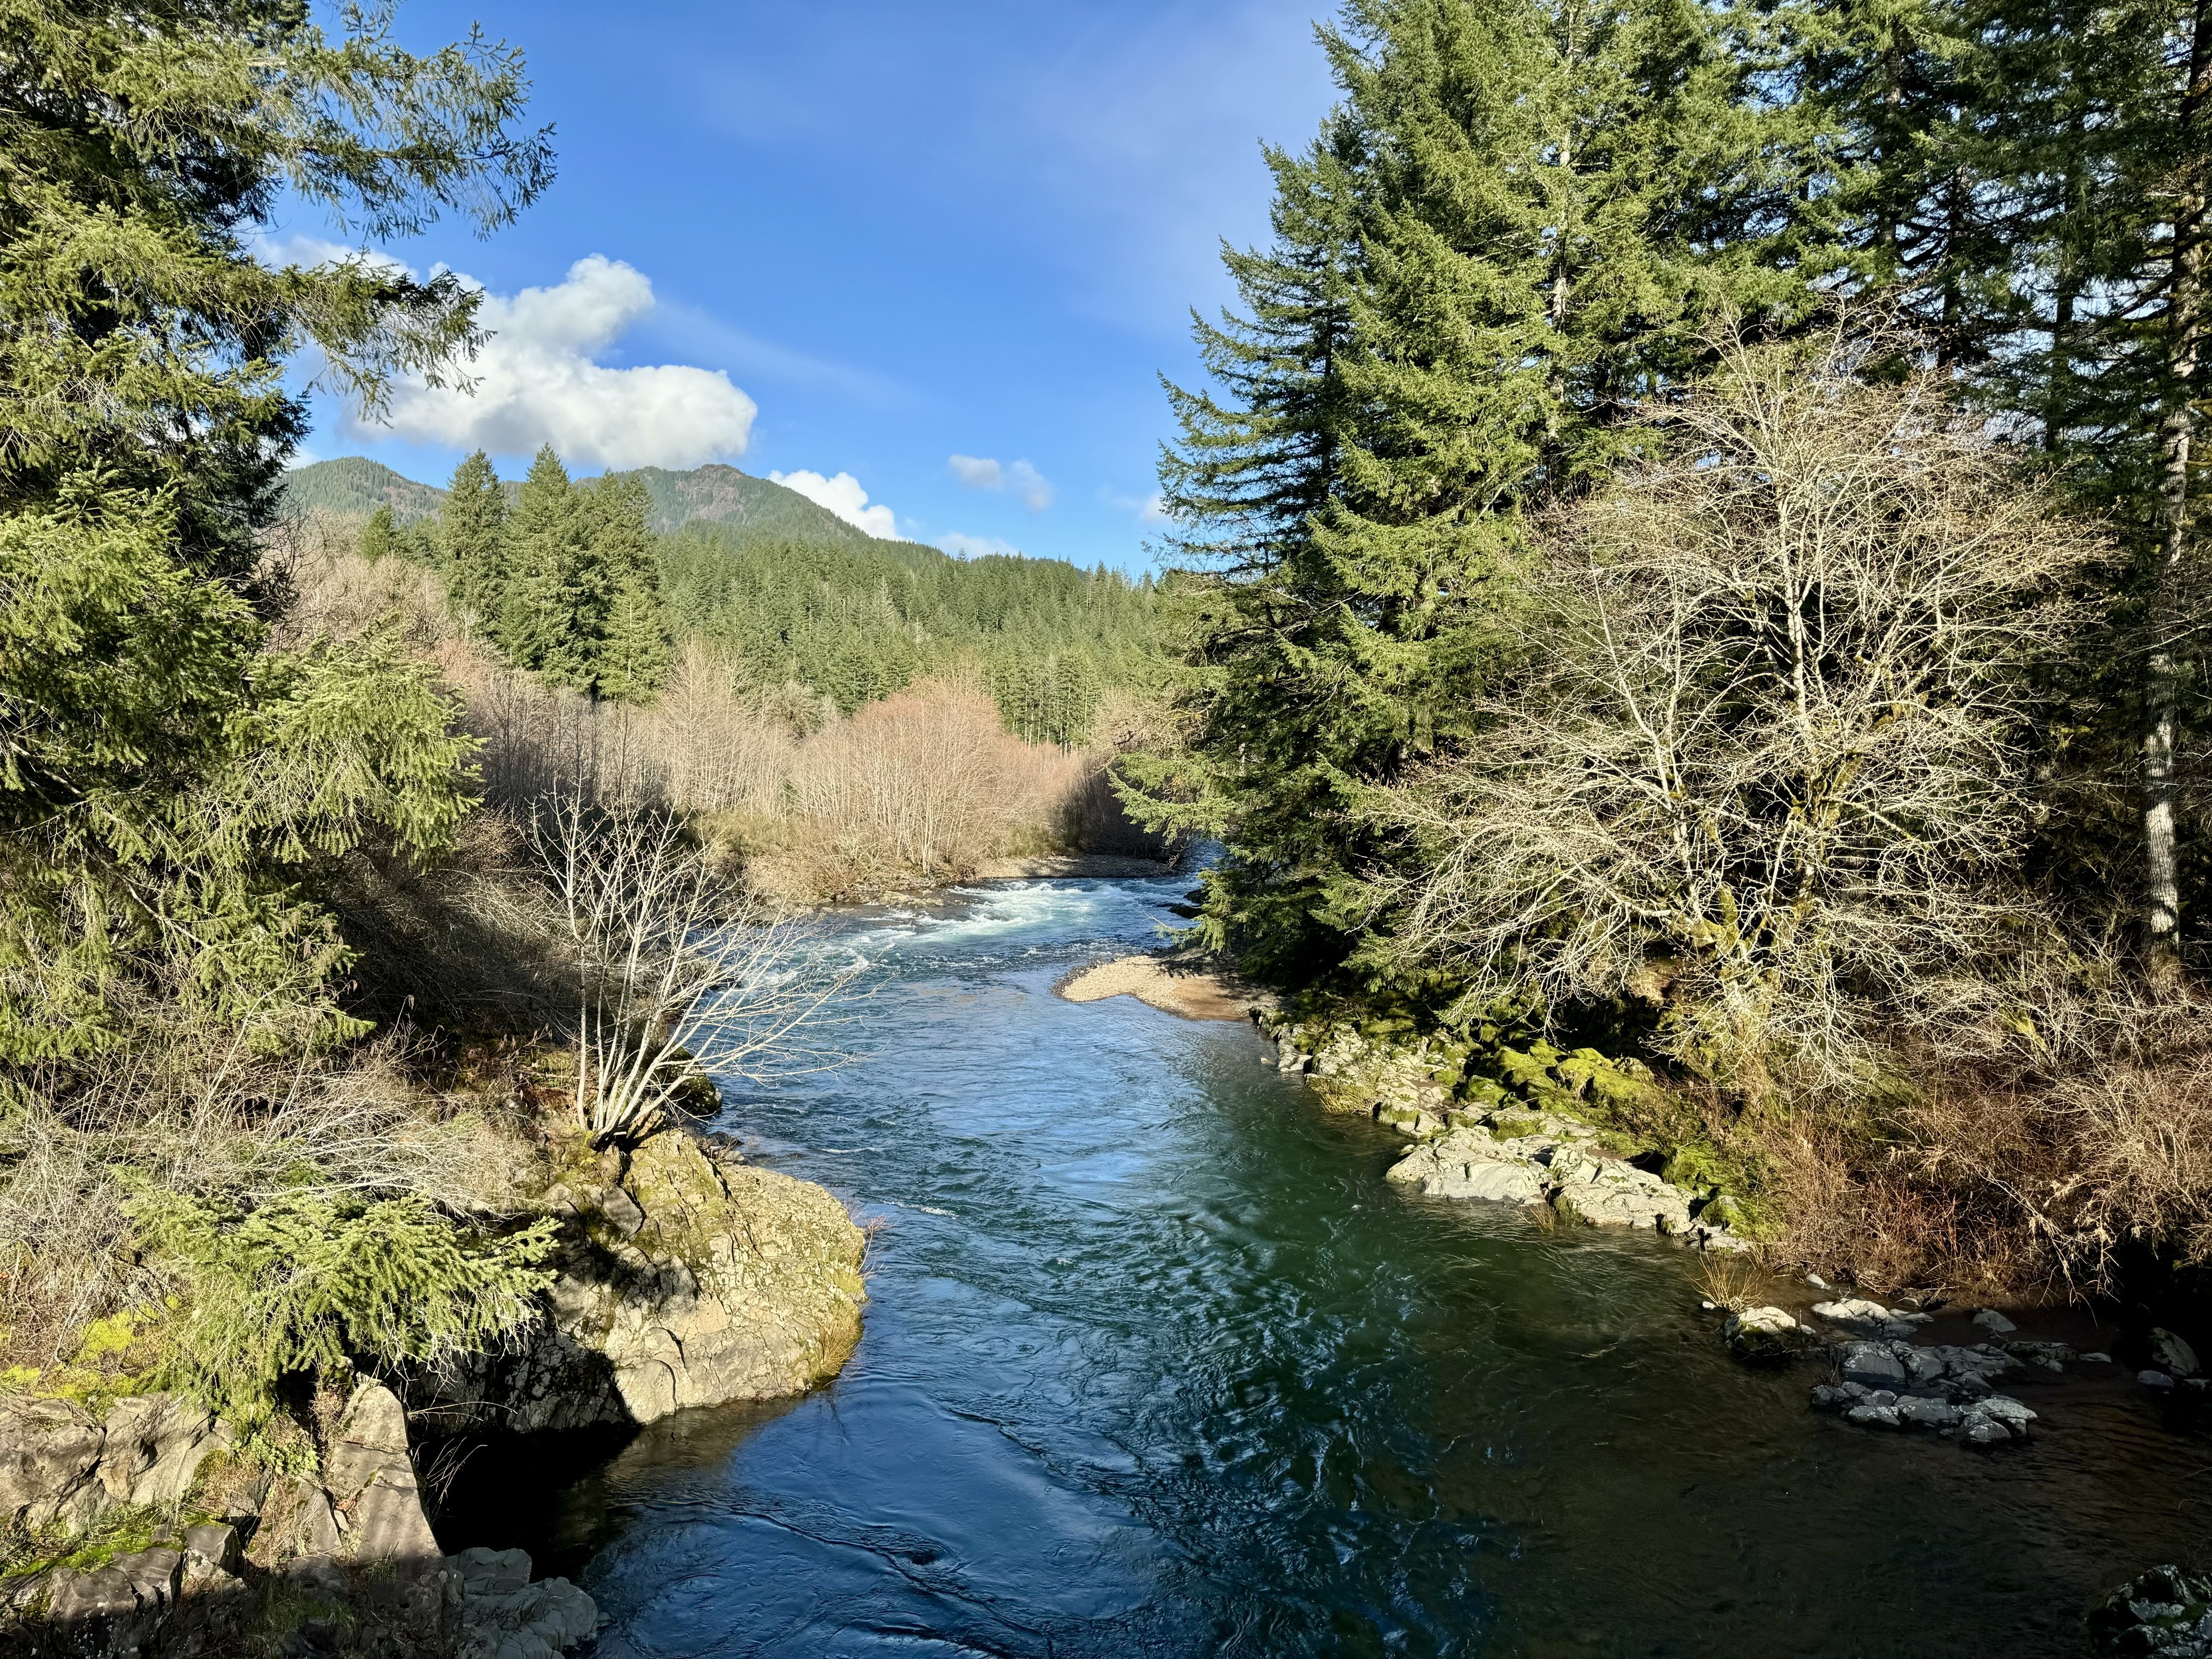 Wilson River at Jones Creek Campground. The cold river flows through a state forest filled with tall green trees. Small rapids can be seen in the distance. The river bank is rocky. Blue sky with some white fluffy clouds.